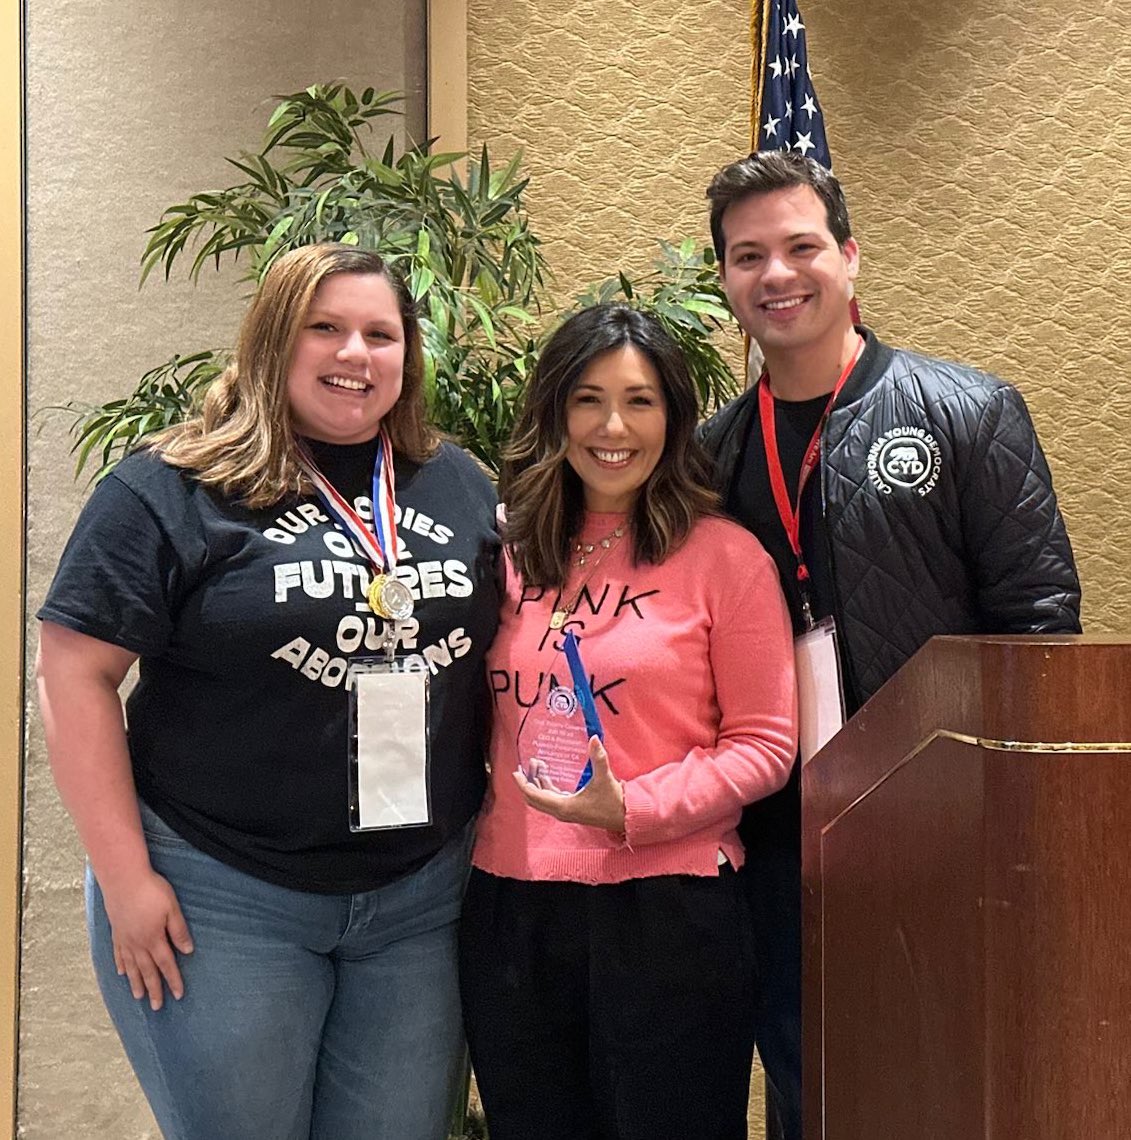 At our Lake Tahoe Post-Primary Organizing Retreat, CYD North State Regional Director Maiya De La Rosa presented PPAC CEO and President Jodi Hicks with the Civil Rights Champion Award